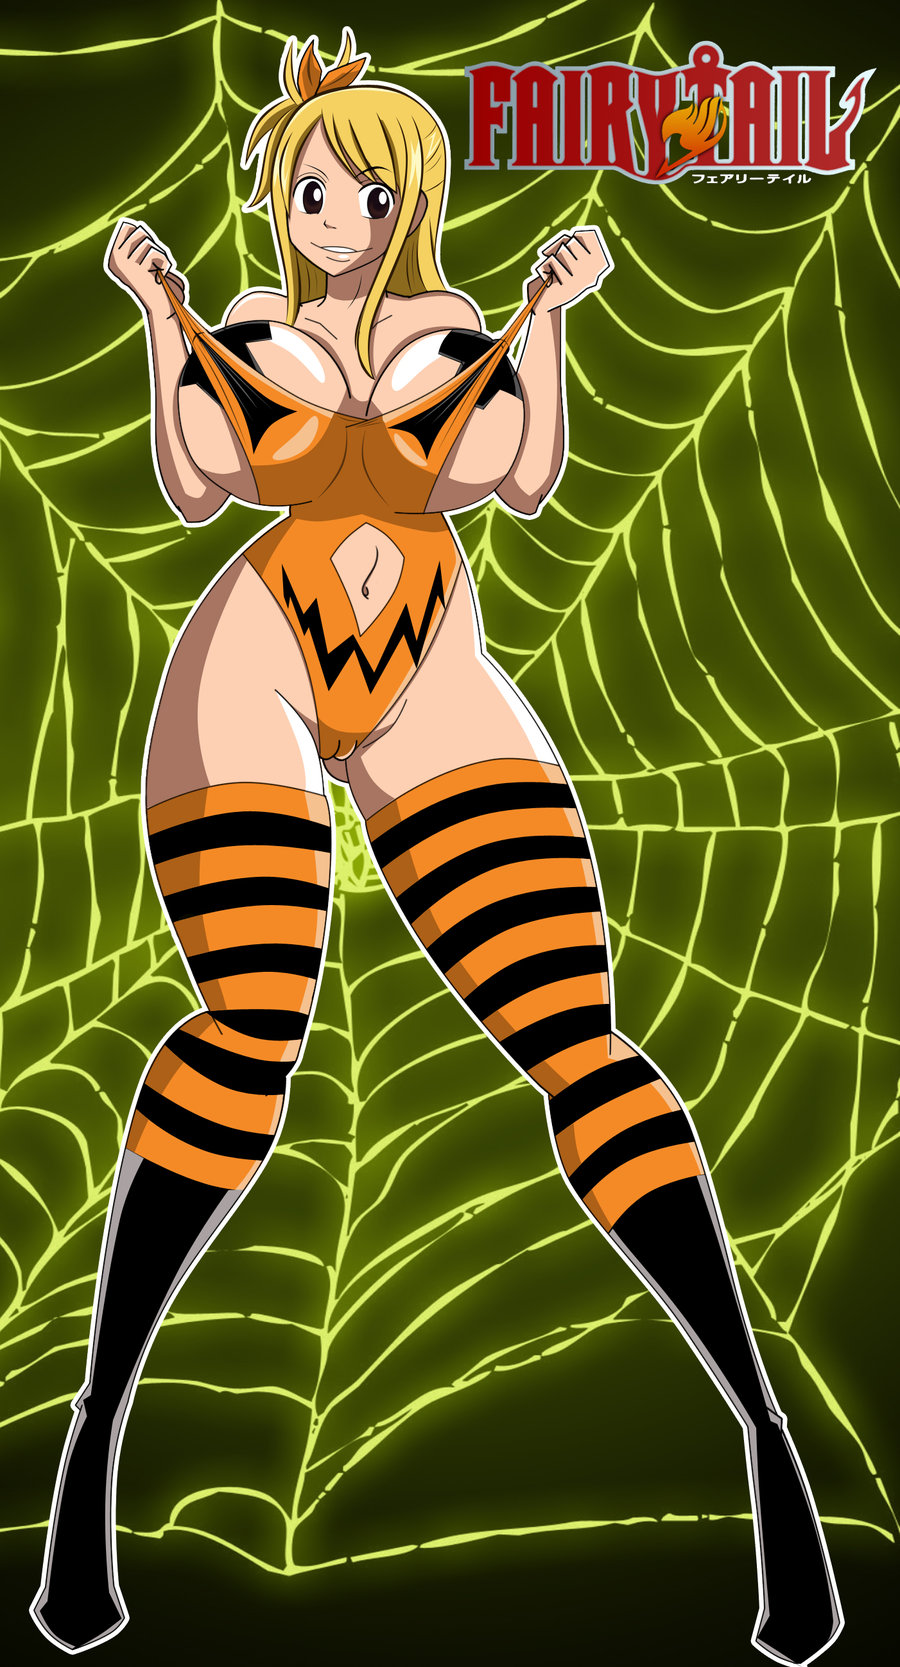 1girl arms ass bangs bare_shoulders belly big_breasts blonde blonde_hair bodypaint boots breasts brown_eyes chest cleavage cobweb covering_breasts elbows eyebrows fairy_tail female female_only fingers forehead full_body grimphantom grin hair hair_tie halloween halloween_costume hands huge_breasts knees legs long_hair looking_at_viewer lucy_heartfilia navel neck nipples outlined_character pussy solo striped_legwear teeth thighs throat